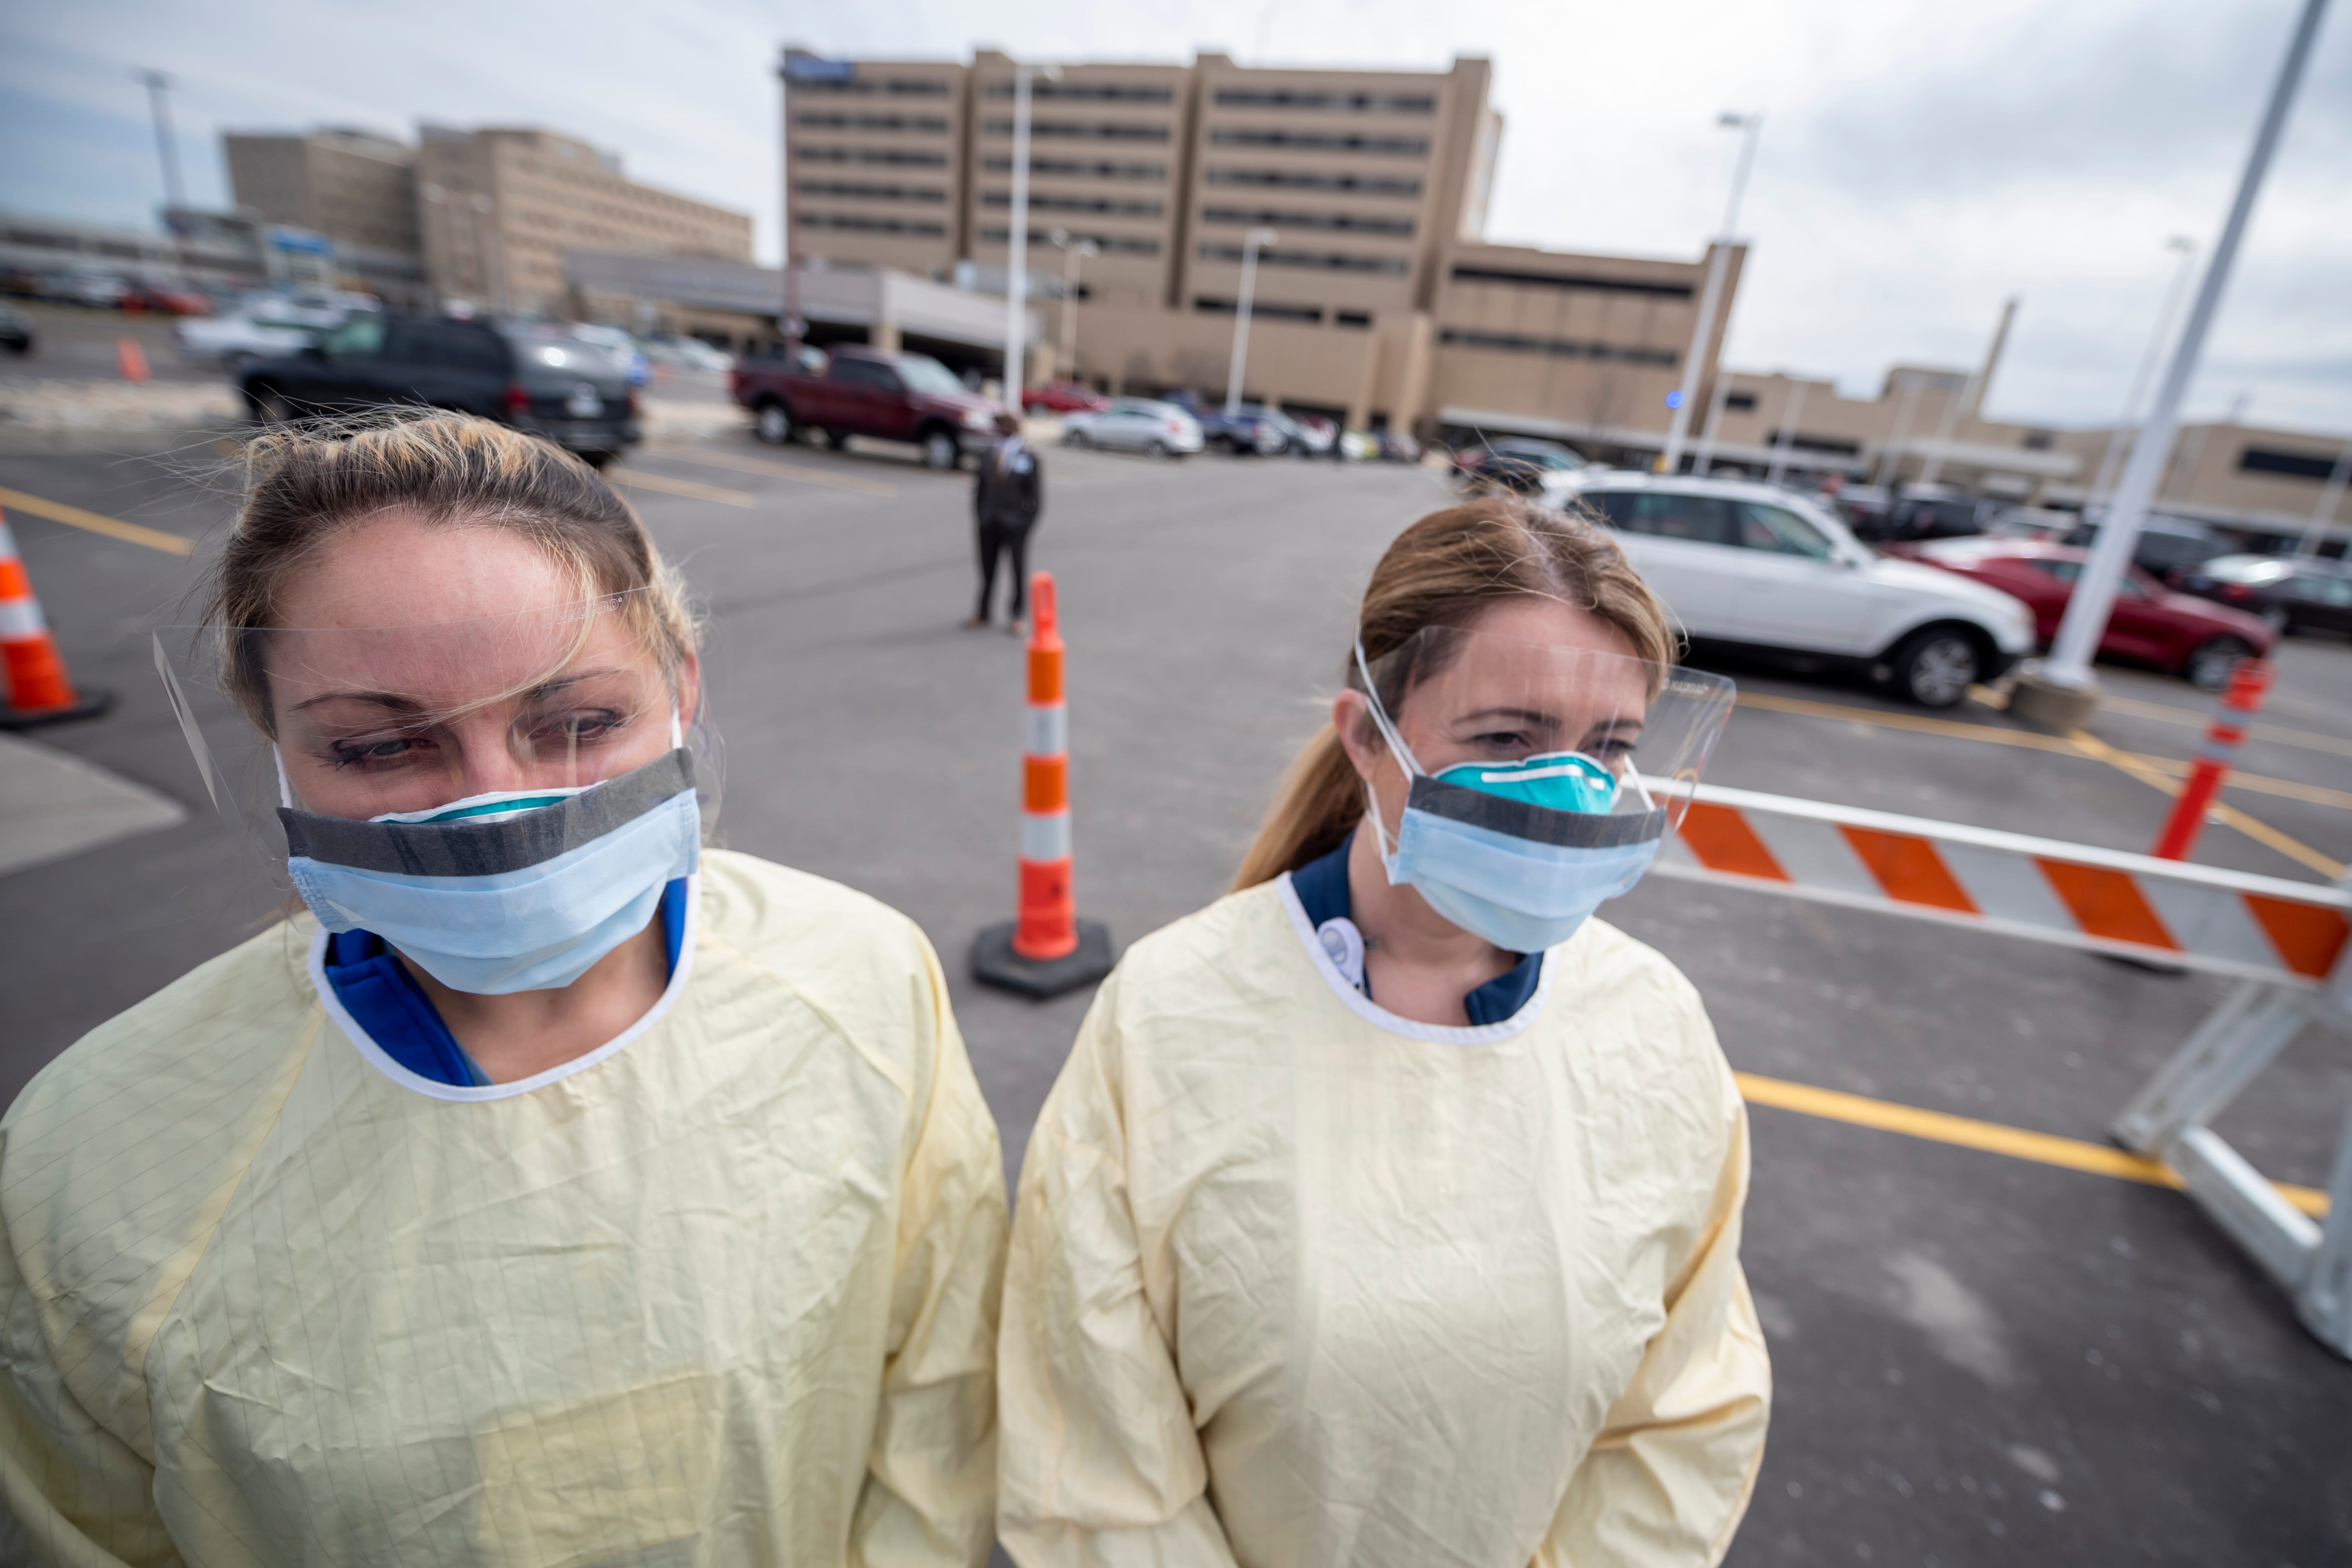 Physician assistant Jessica Hamilton, left, and, registered nurse Amena Beslic, director of the emergency center, stand in front of Beaumont hospital in Royal Oak during a press conference, March 16, 2020. Members of the public concerned that they may be infected with the coronavirus were able to get screening done from their vehicles.